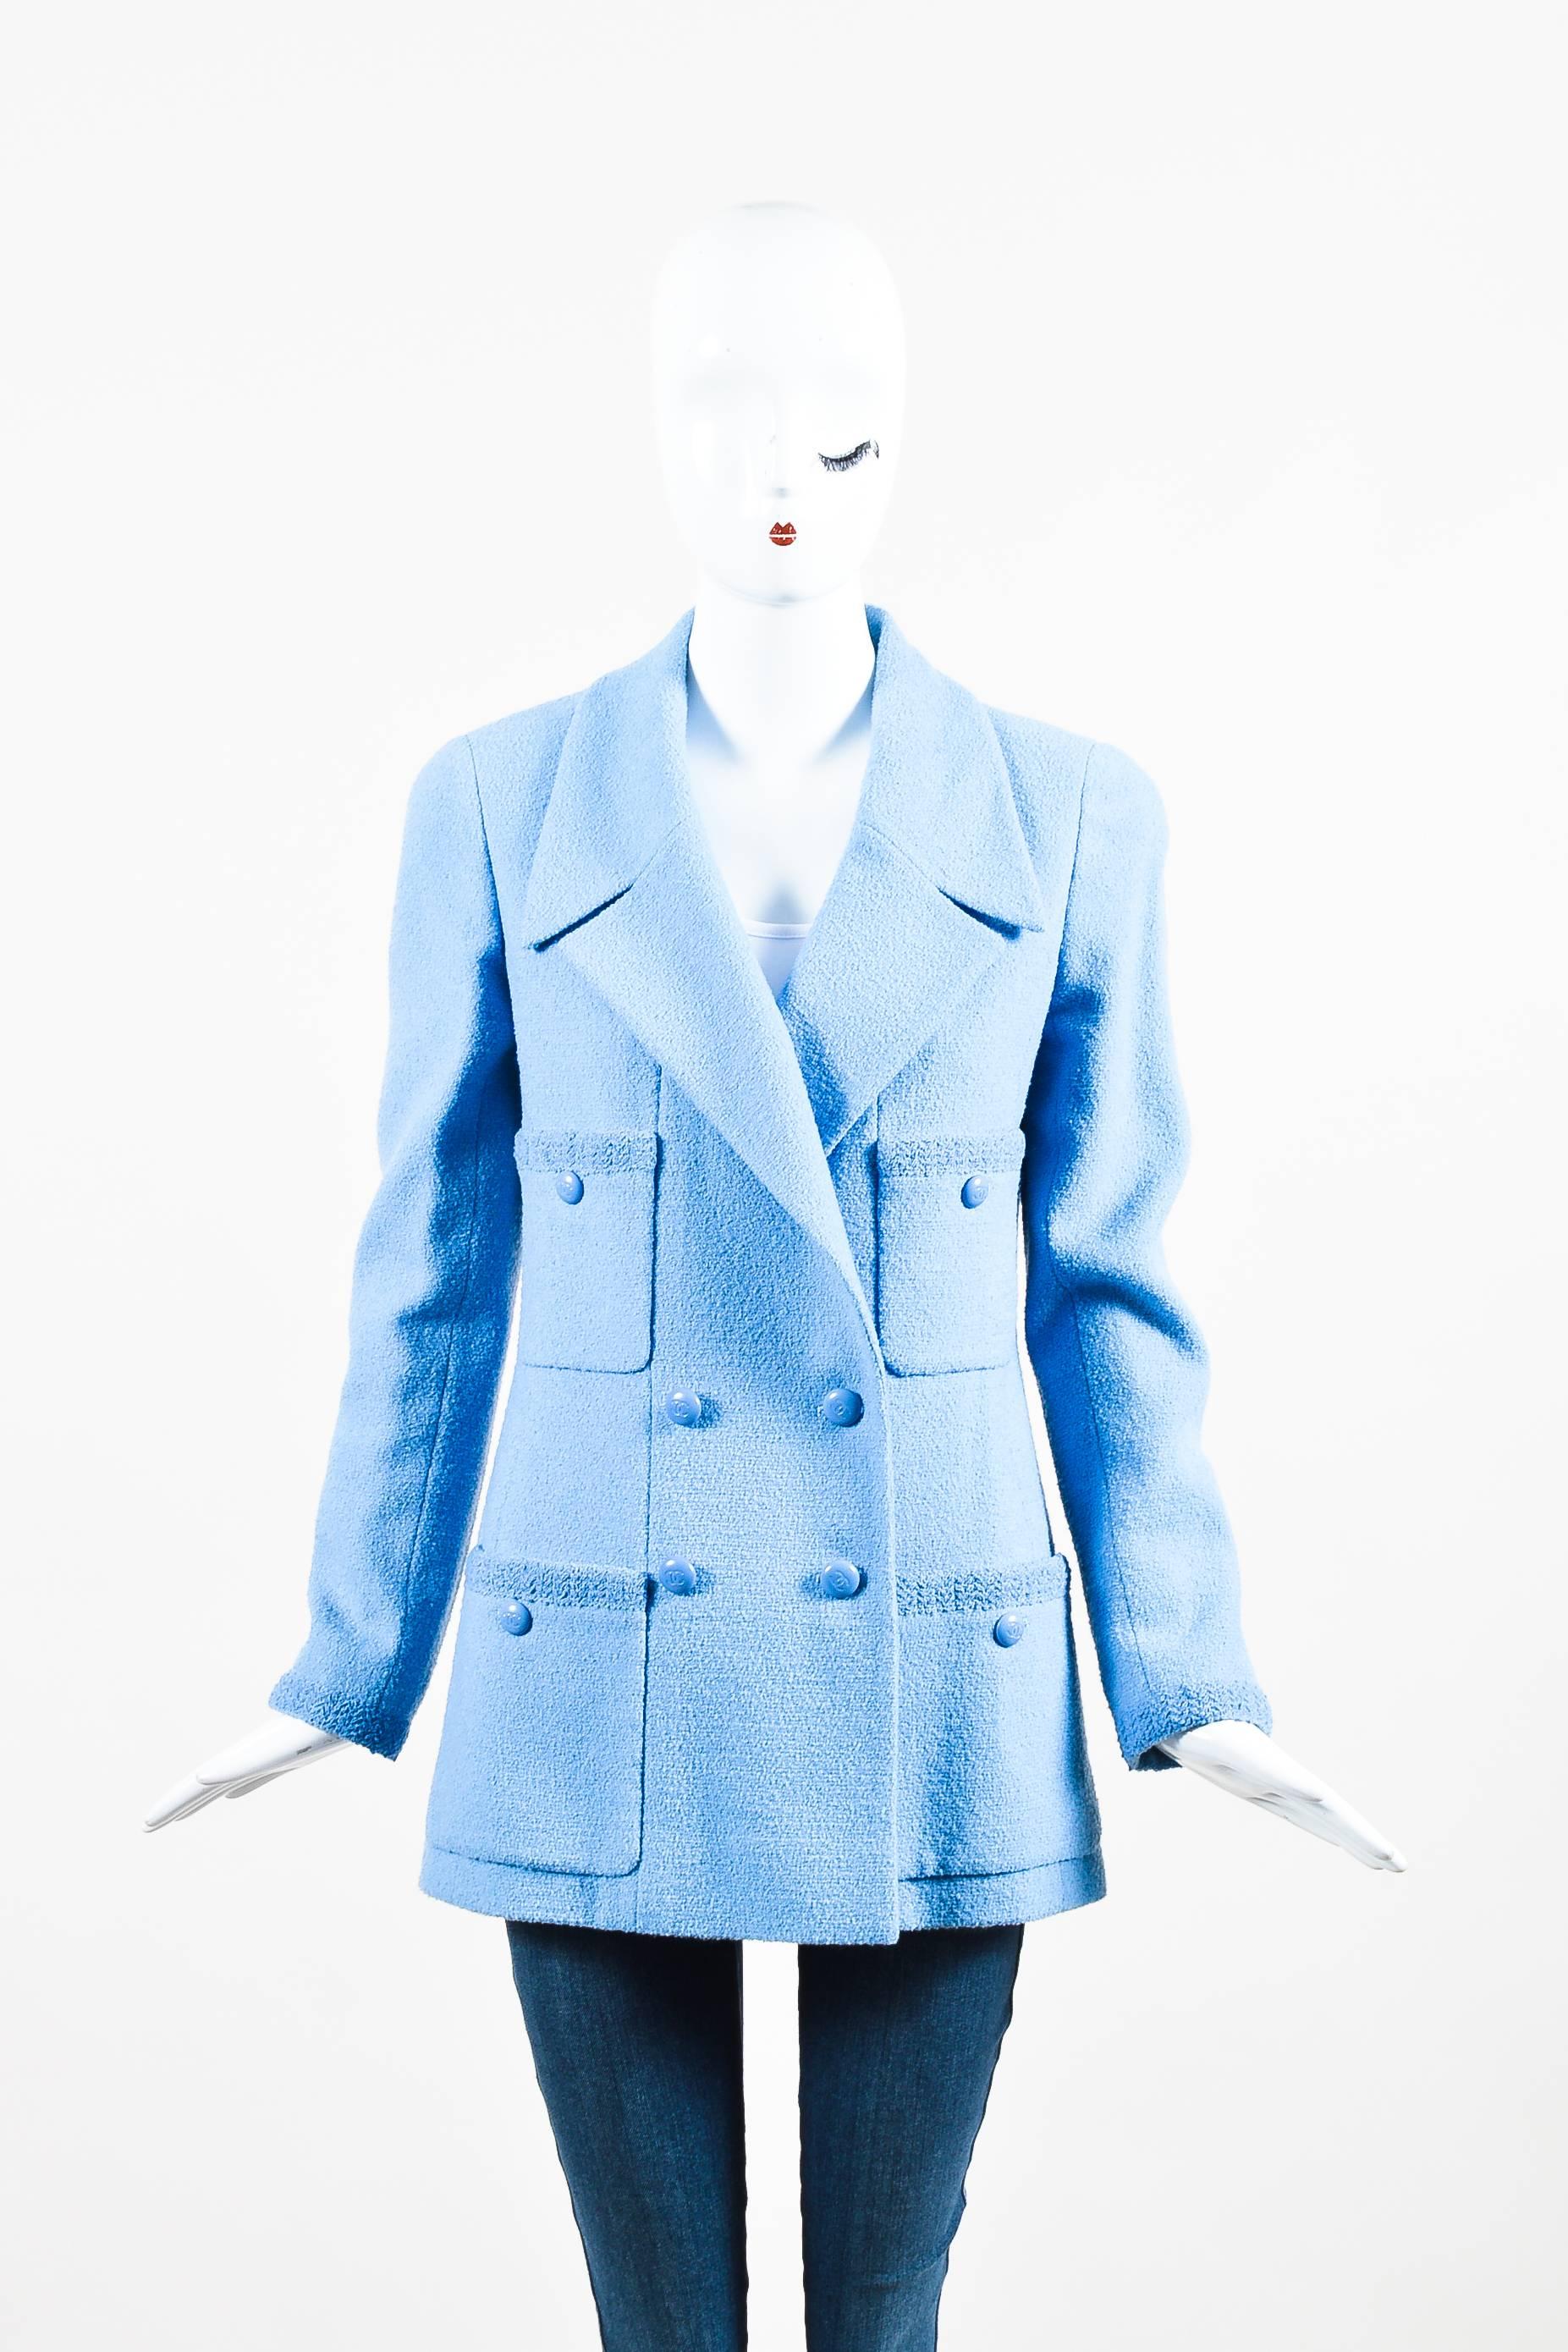 Baby blue wool double breasted long sleeve jacket from Chanel Boutique. Four flat lay pockets on the front of jacket have 'CC' logo engraved large round blue buttons for closure. These buttons also appear down the front of jacket and at the bottom